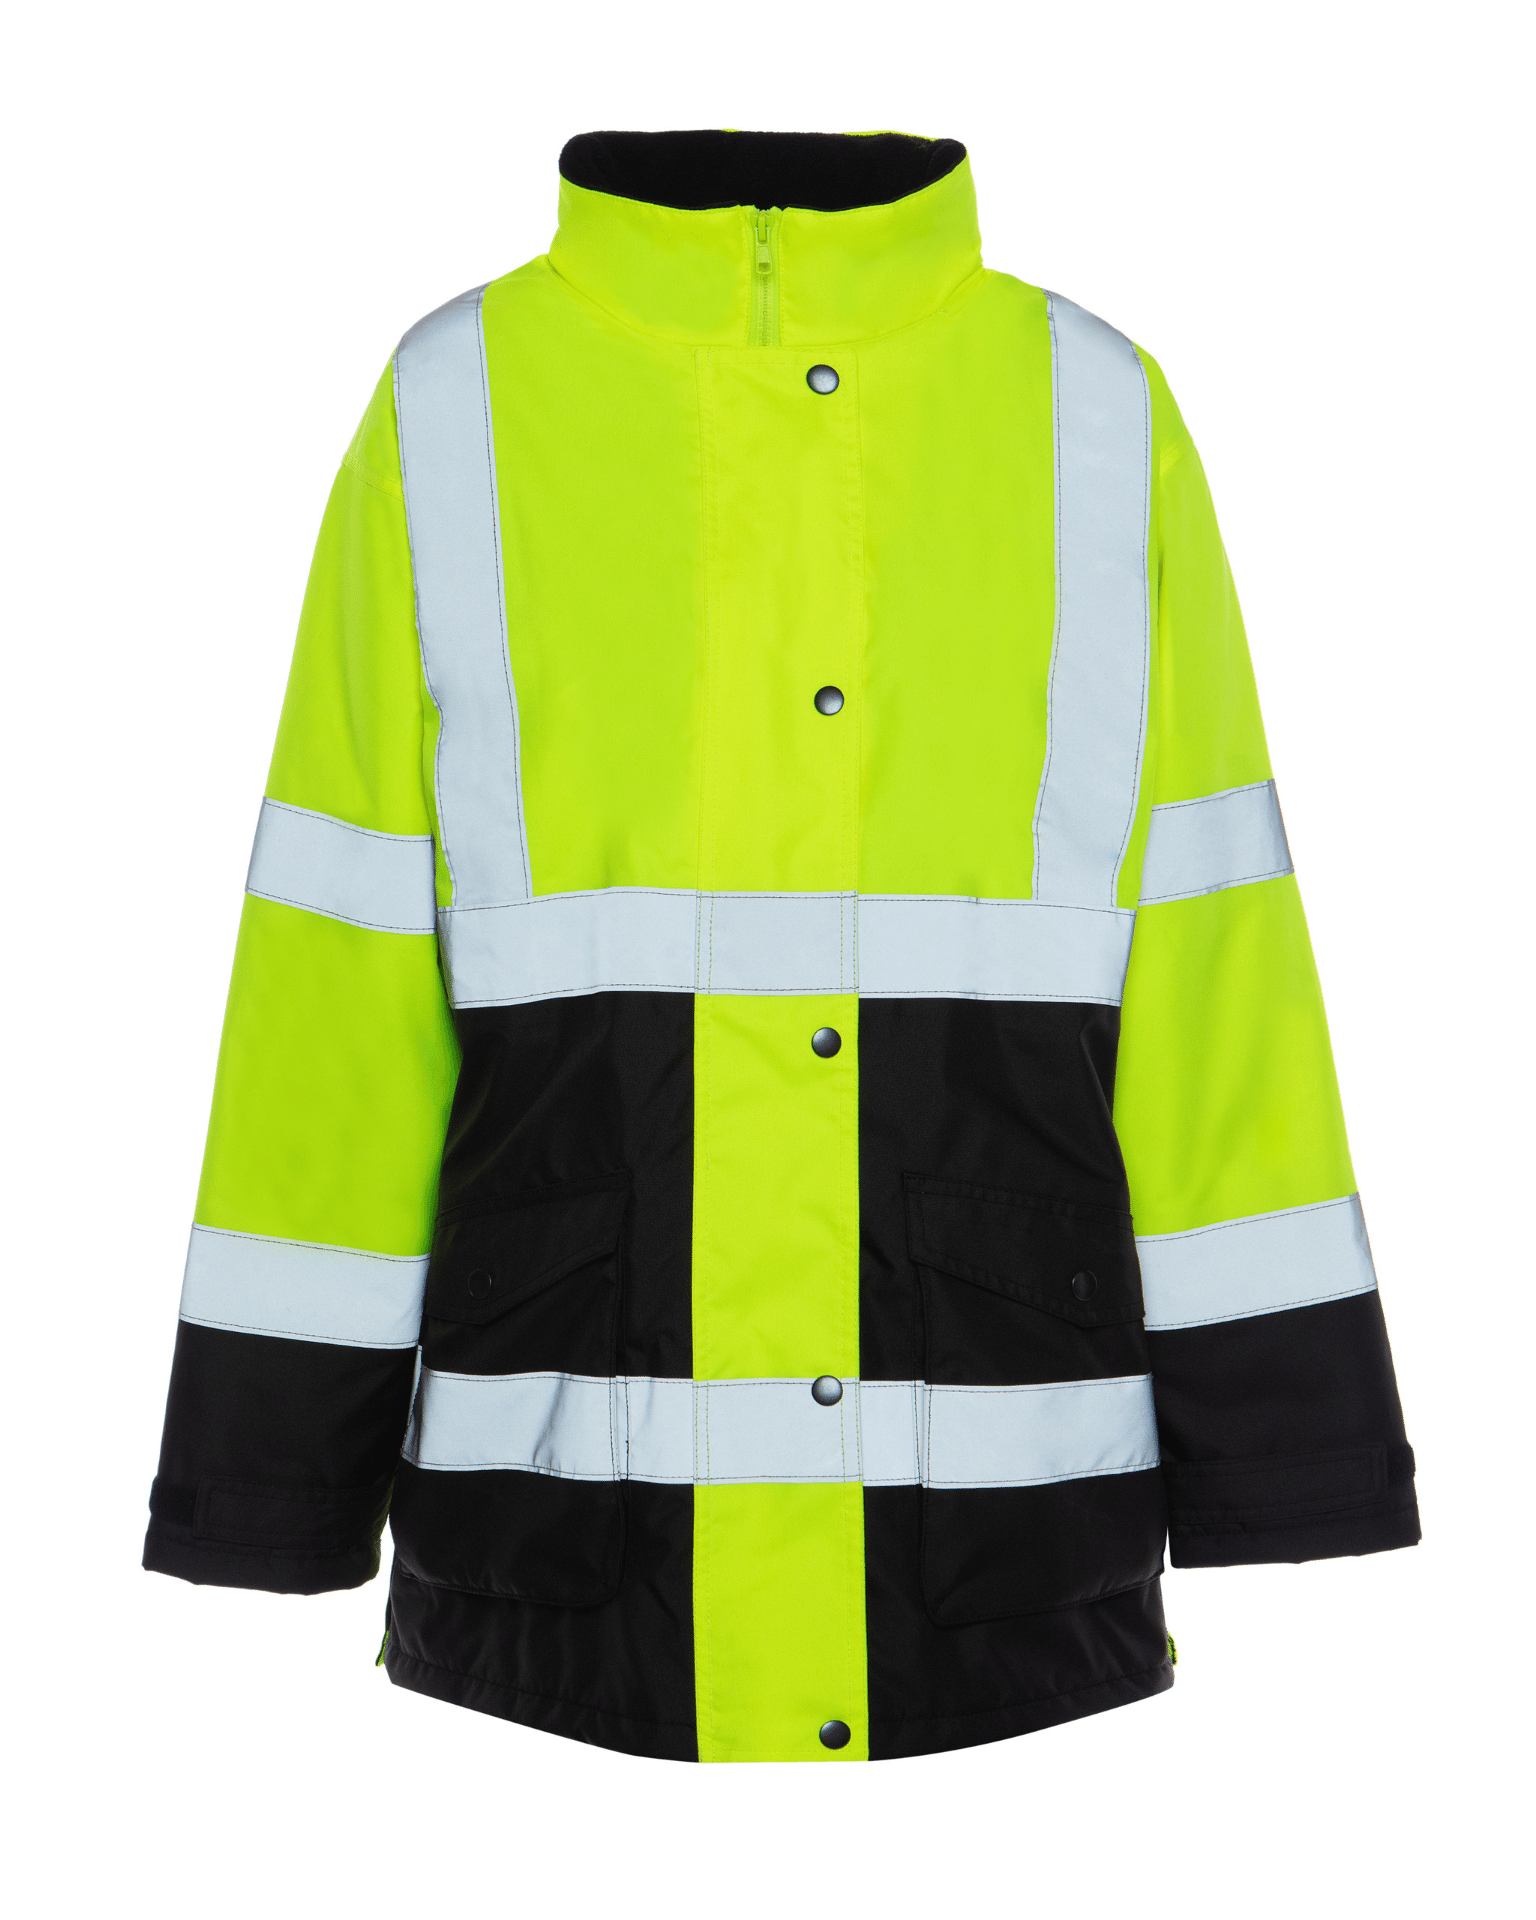 ANSI Class 2 High Visibility Women's teflon protected micro-fleece lined parka by Utility Pro